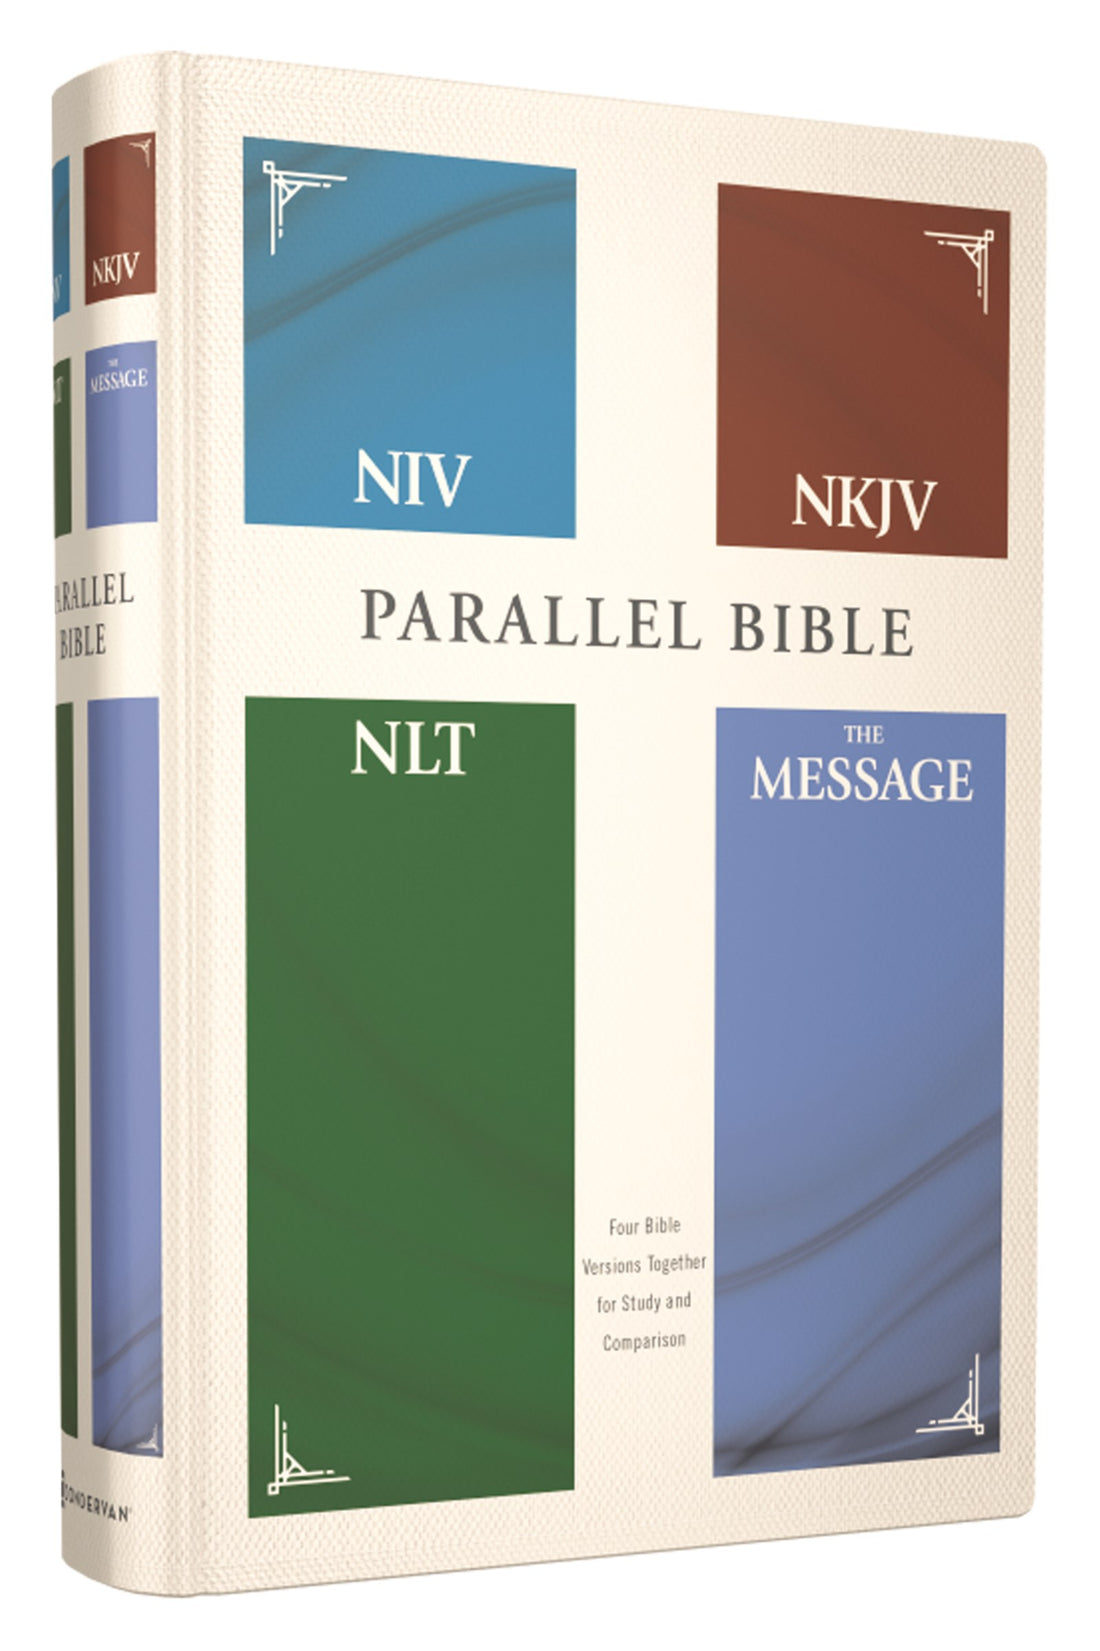 Seed of Abraham Christian Bookstore - Contemporary Comparative Parallel Bible (NIV  NKJV  NLT  The Message)-Hardcover